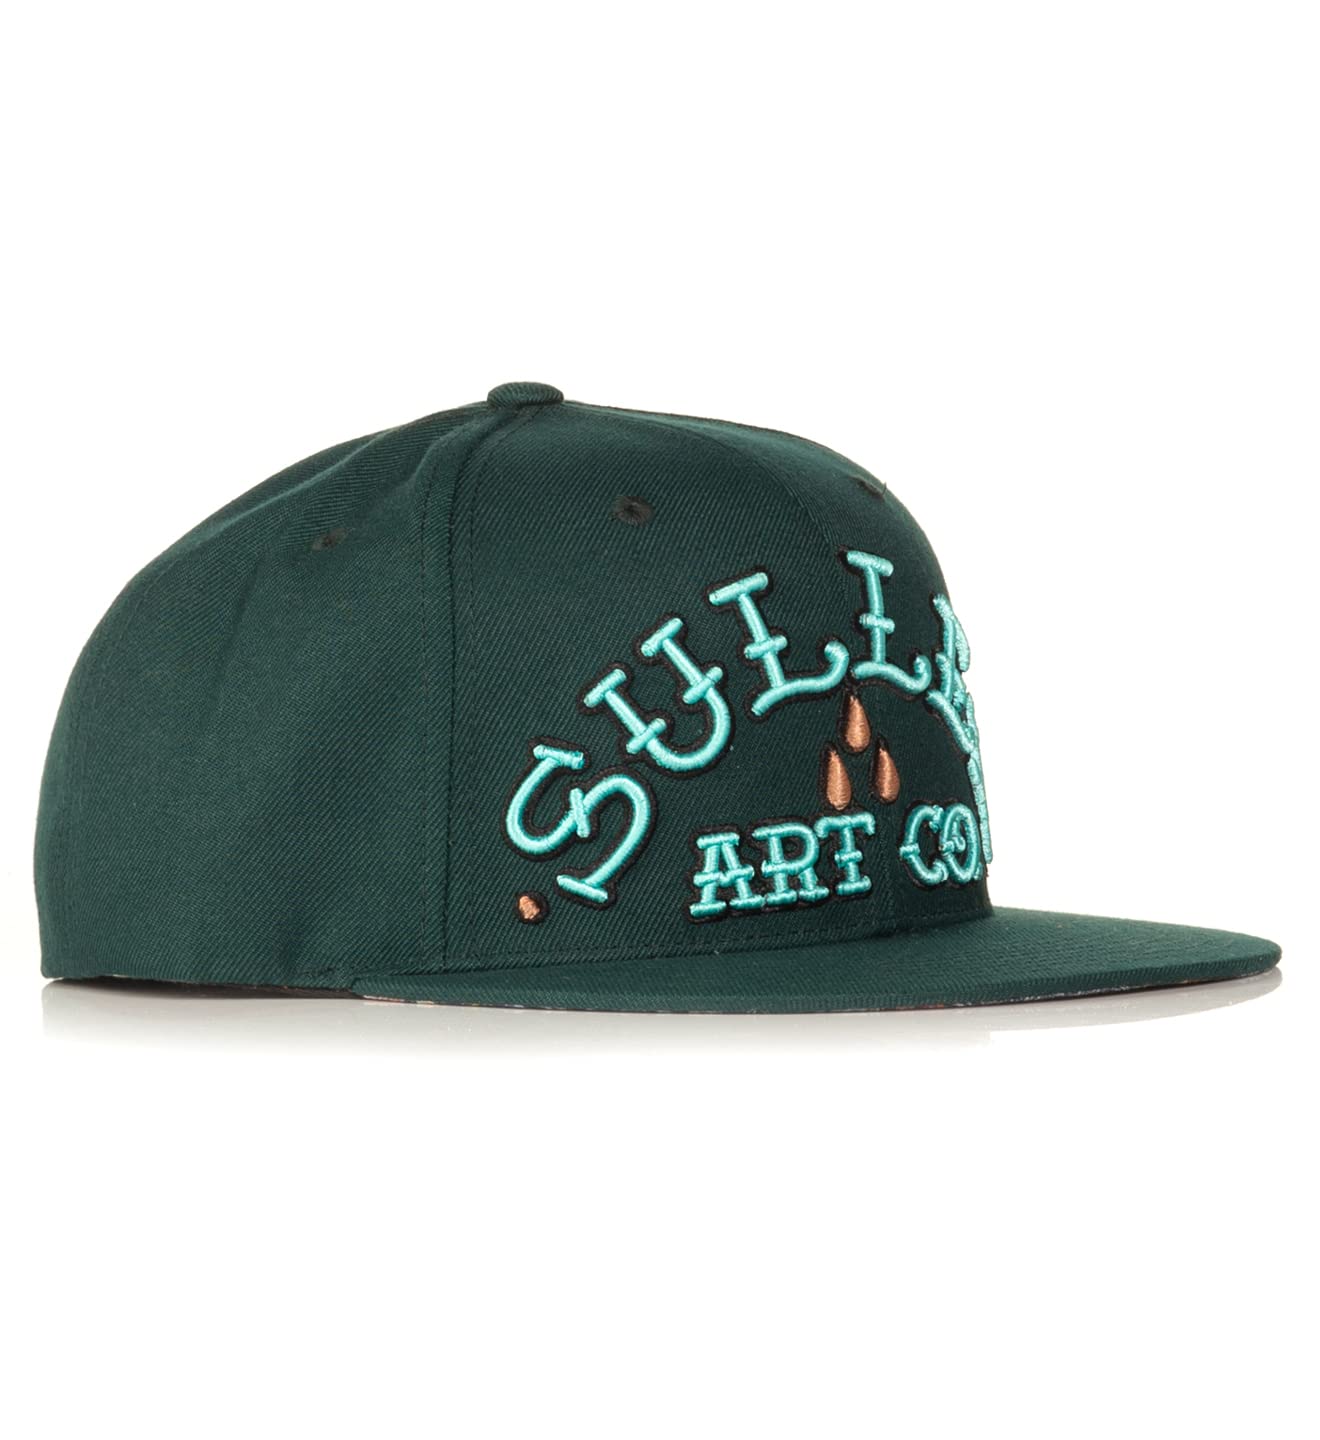 Sullen Rock of Mermaids Lifestyle Graphic Snapback Adjustable Hat Green - Caps Fitted Caps Fitted Sullen Art Collective